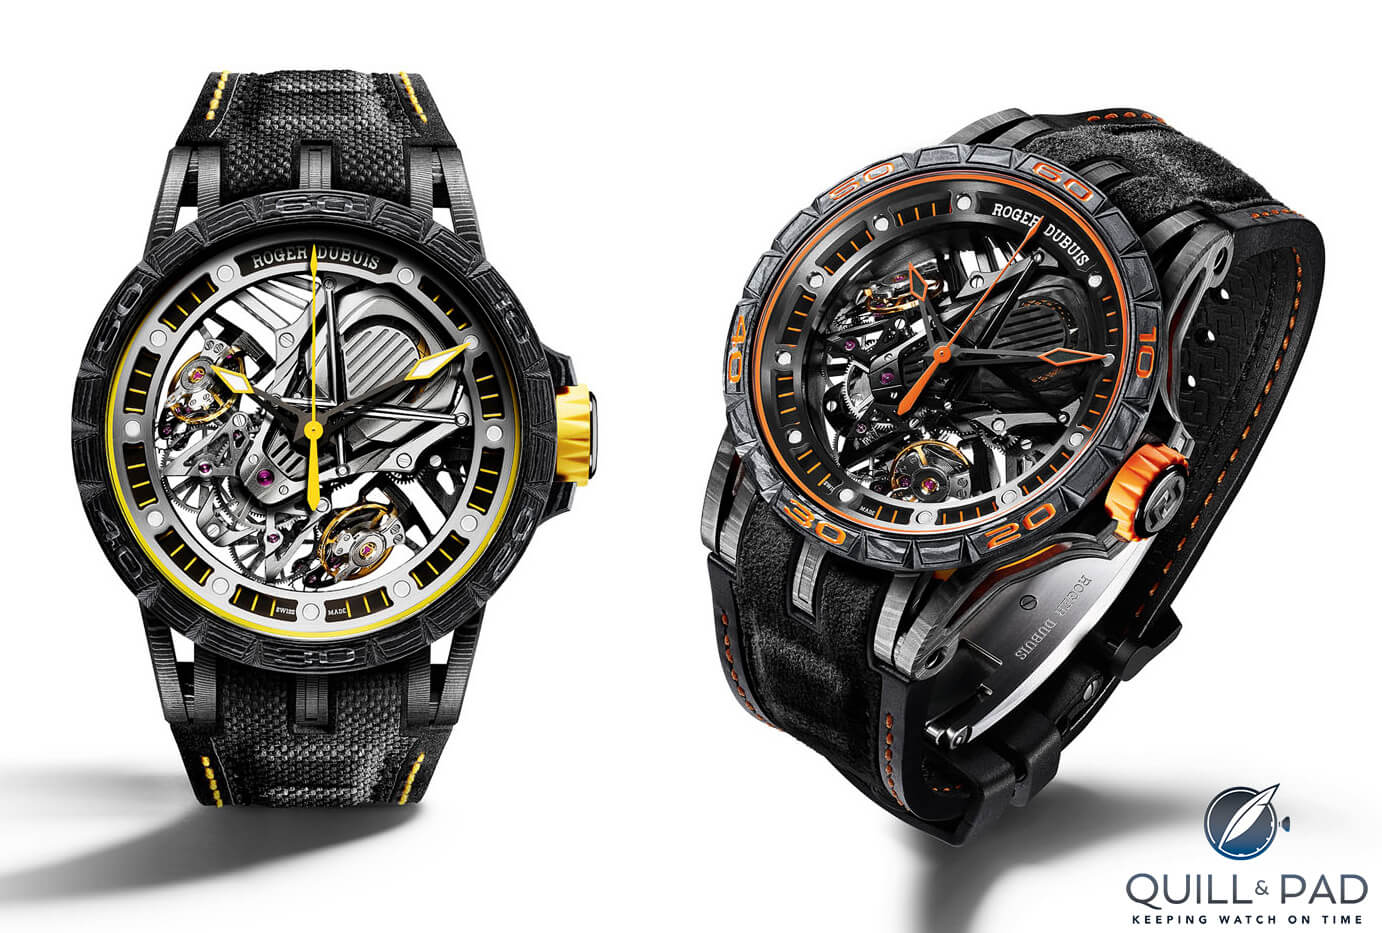 Roger Dubuis Excalibur Aventador S in yellow and orange